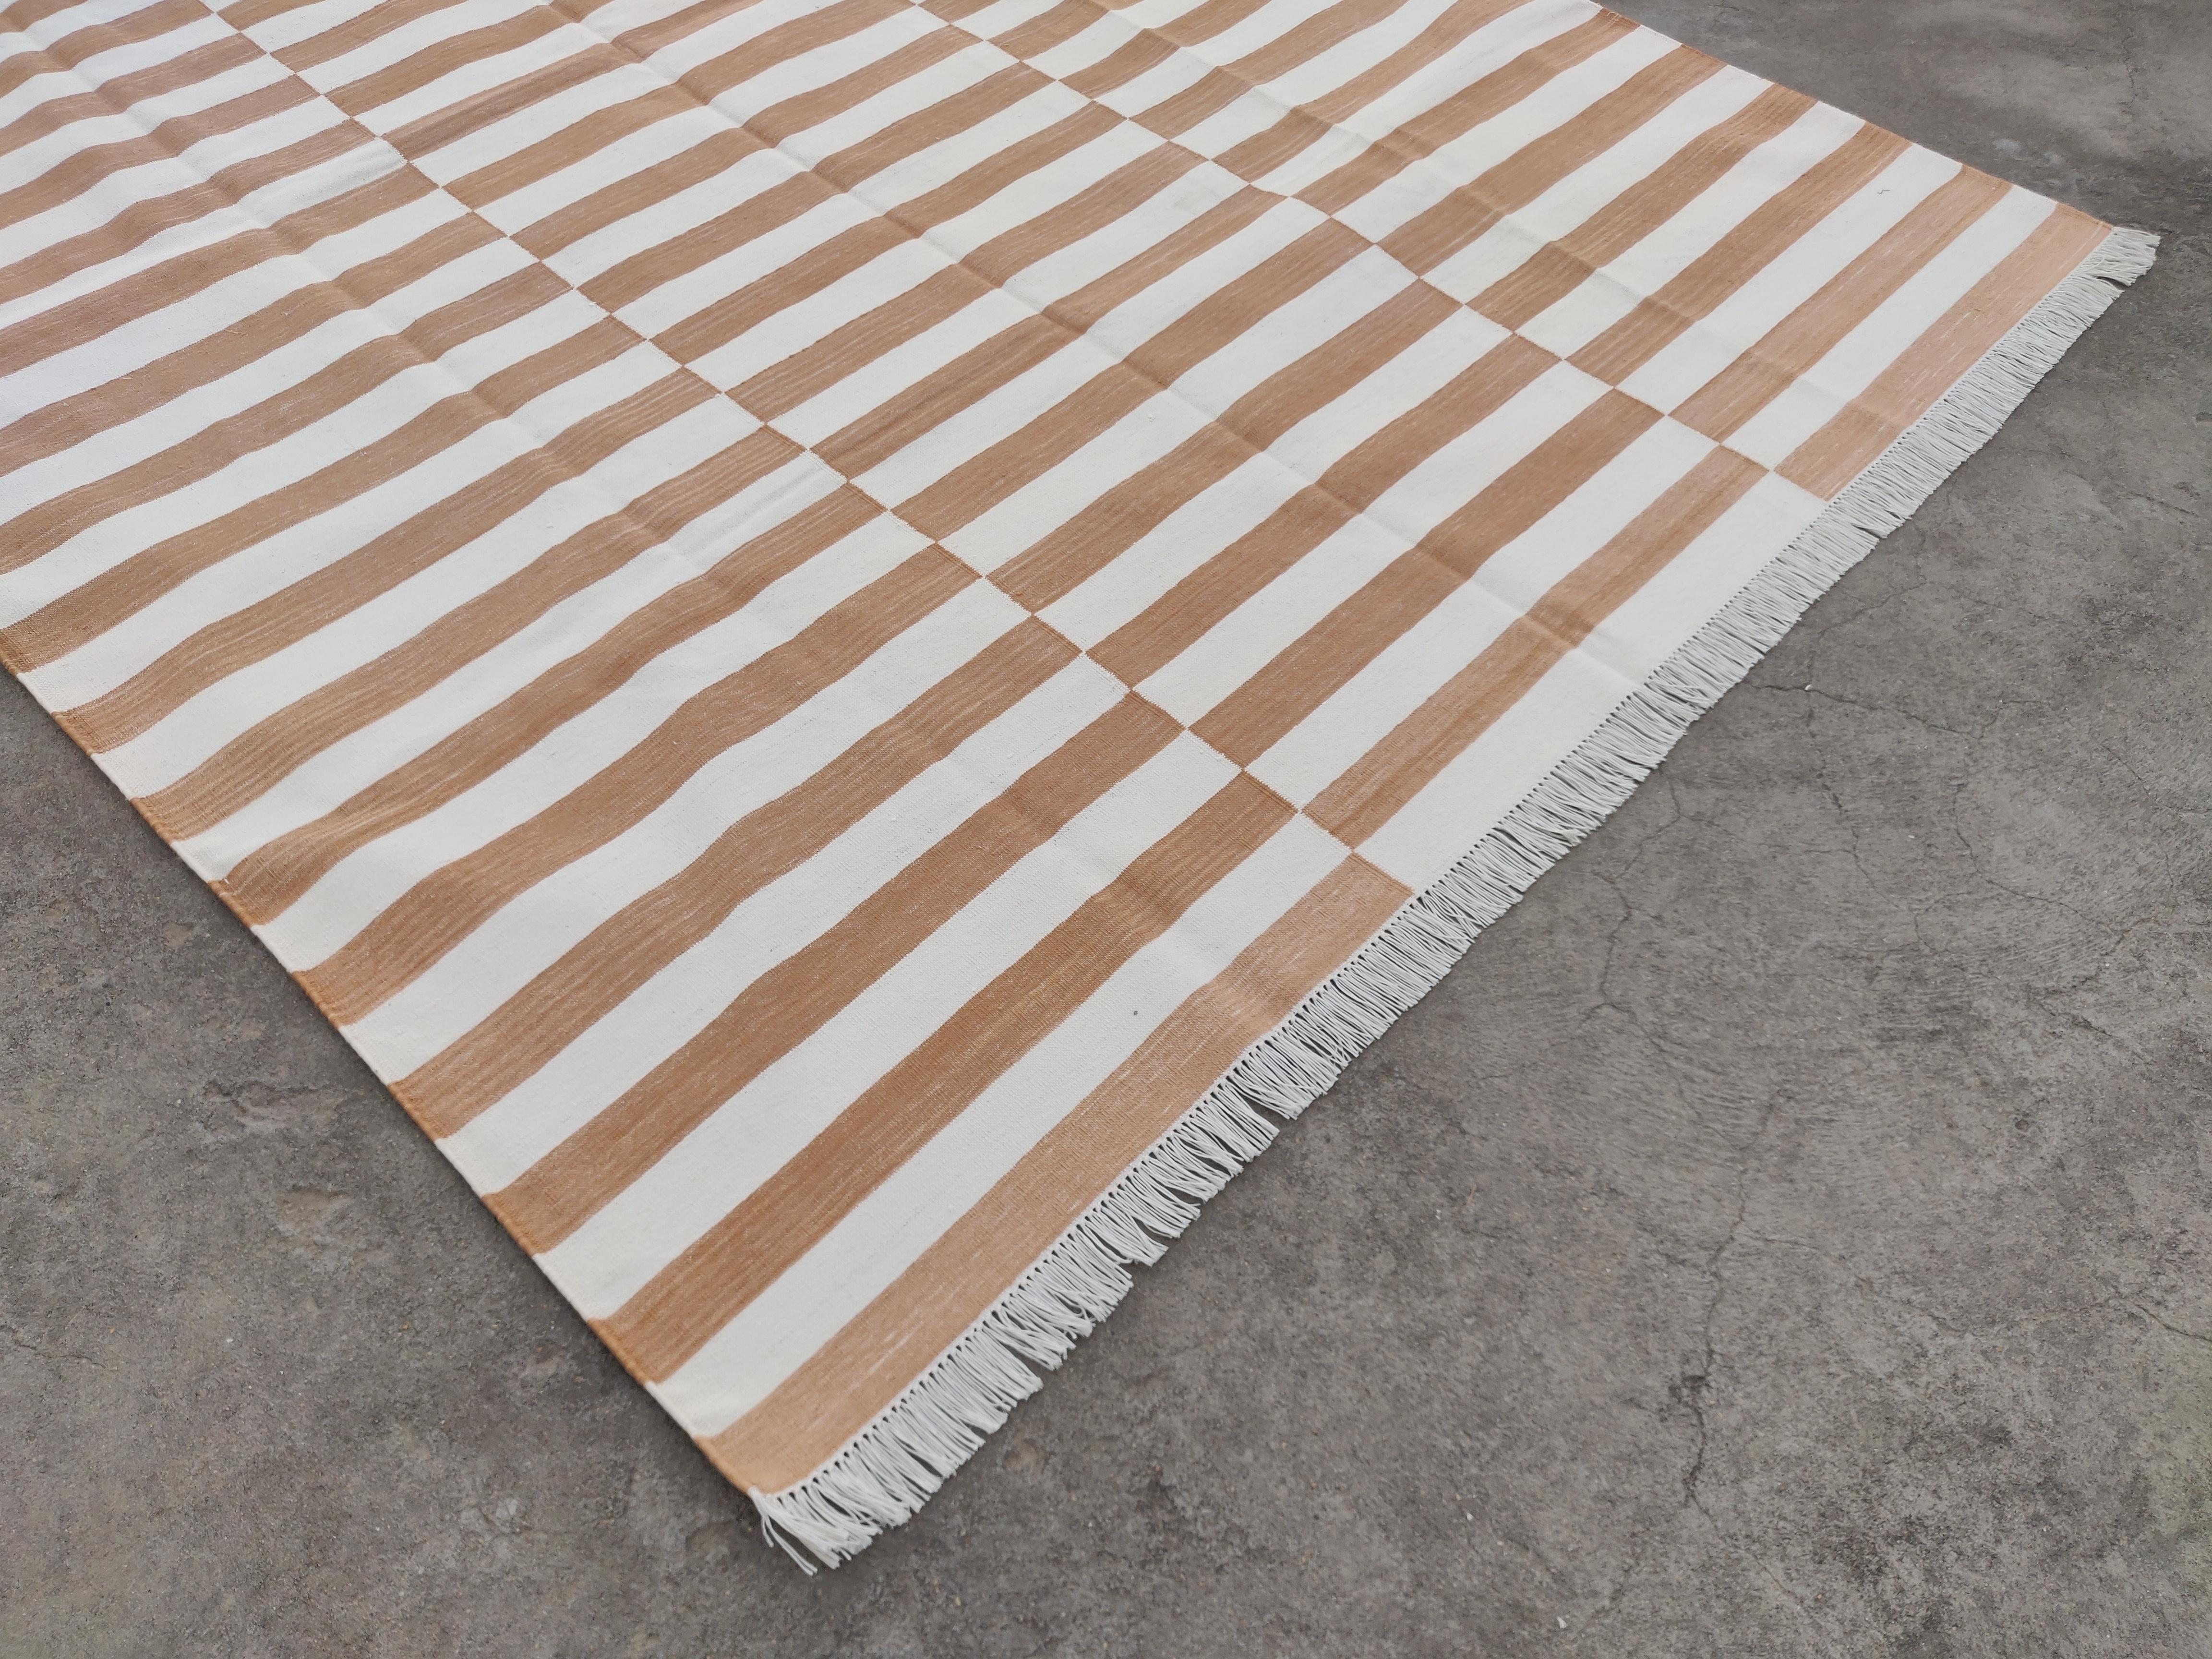 Hand-Woven Handmade Cotton Area Flat Weave Rug, 6x9 Tan And White Striped Indian Dhurrie For Sale